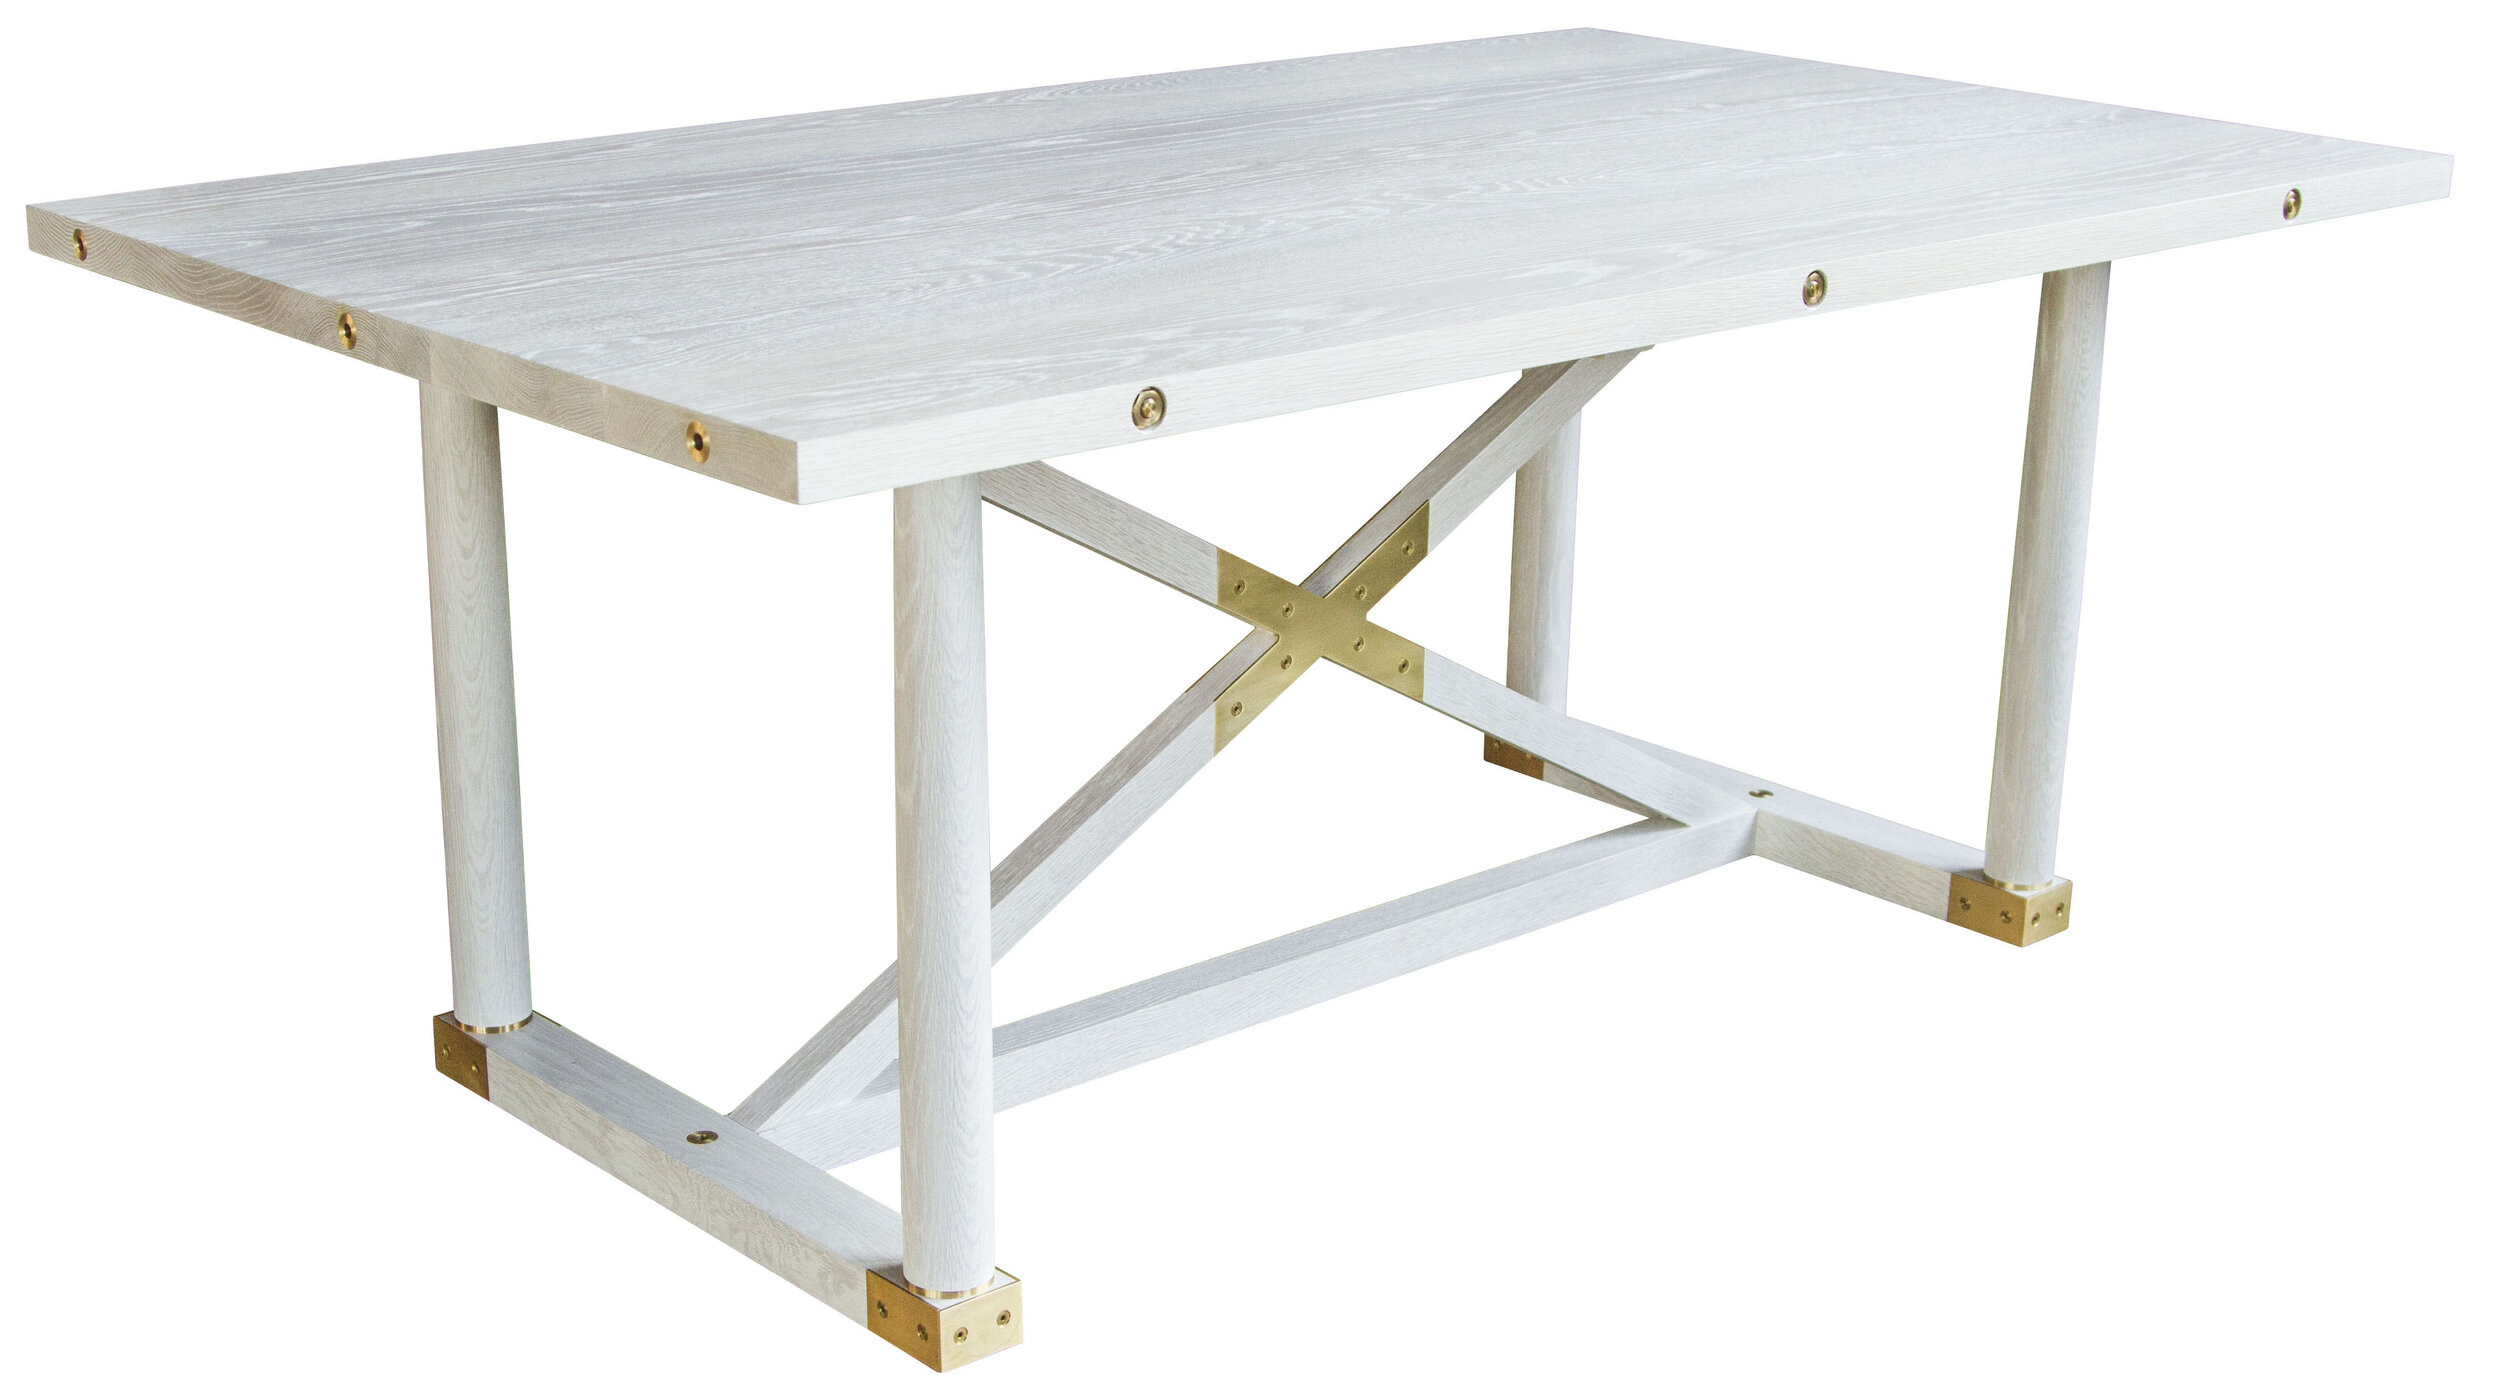 Carden Table with leaf extensions removed